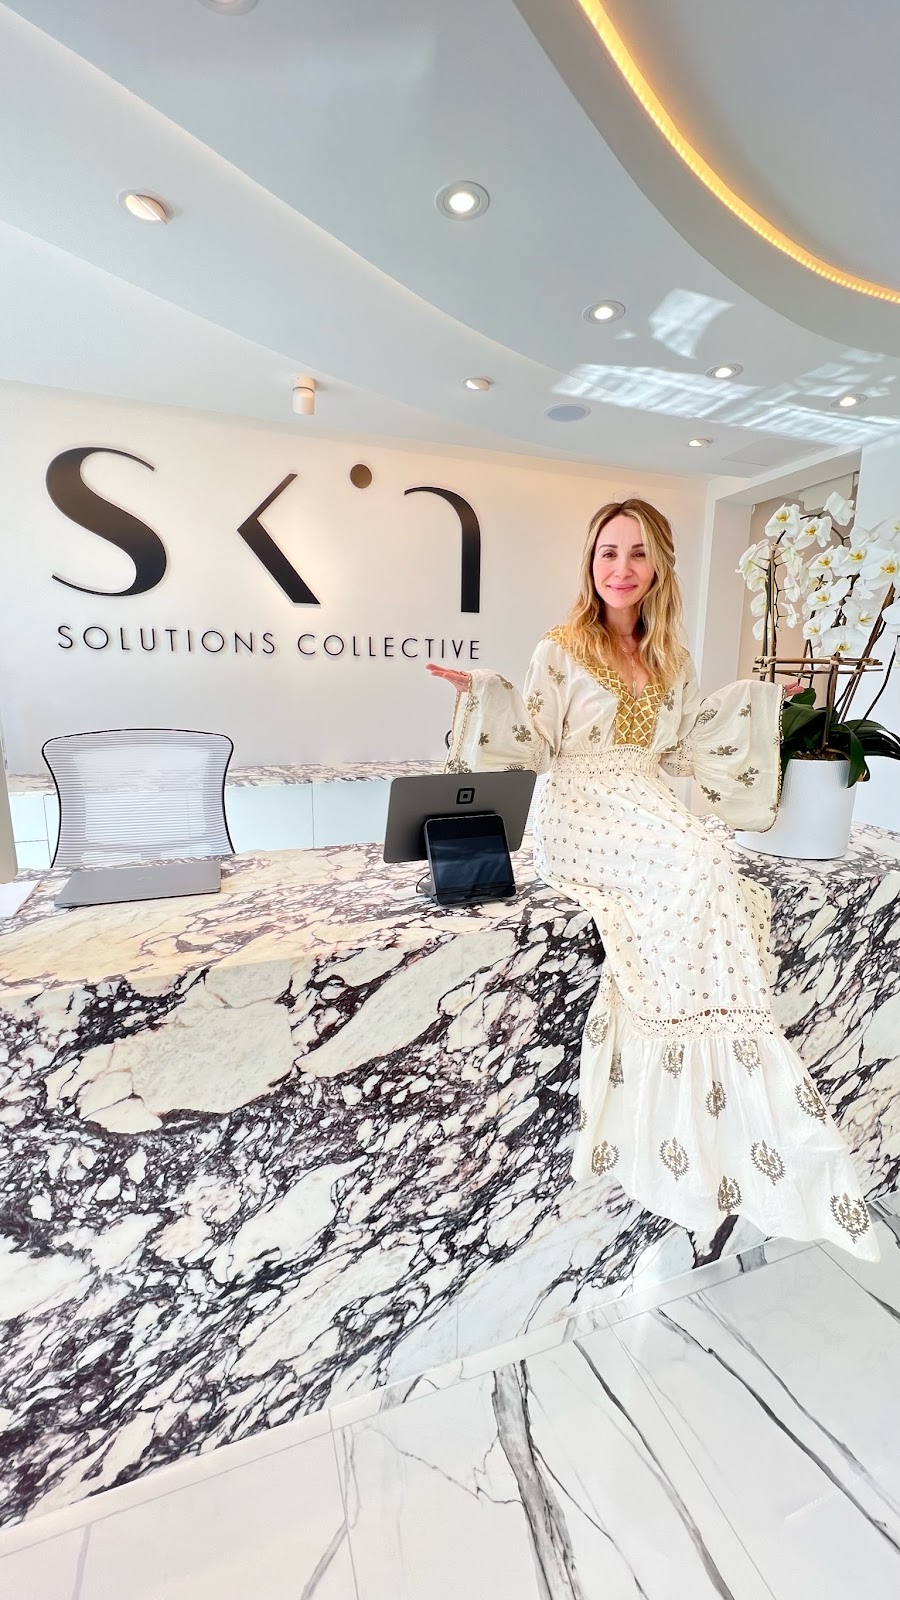 Skin Solutions Collective - Hamptons | Hills Station Rd #4, Southampton, NY 11968 | Phone: (631) 302-7927